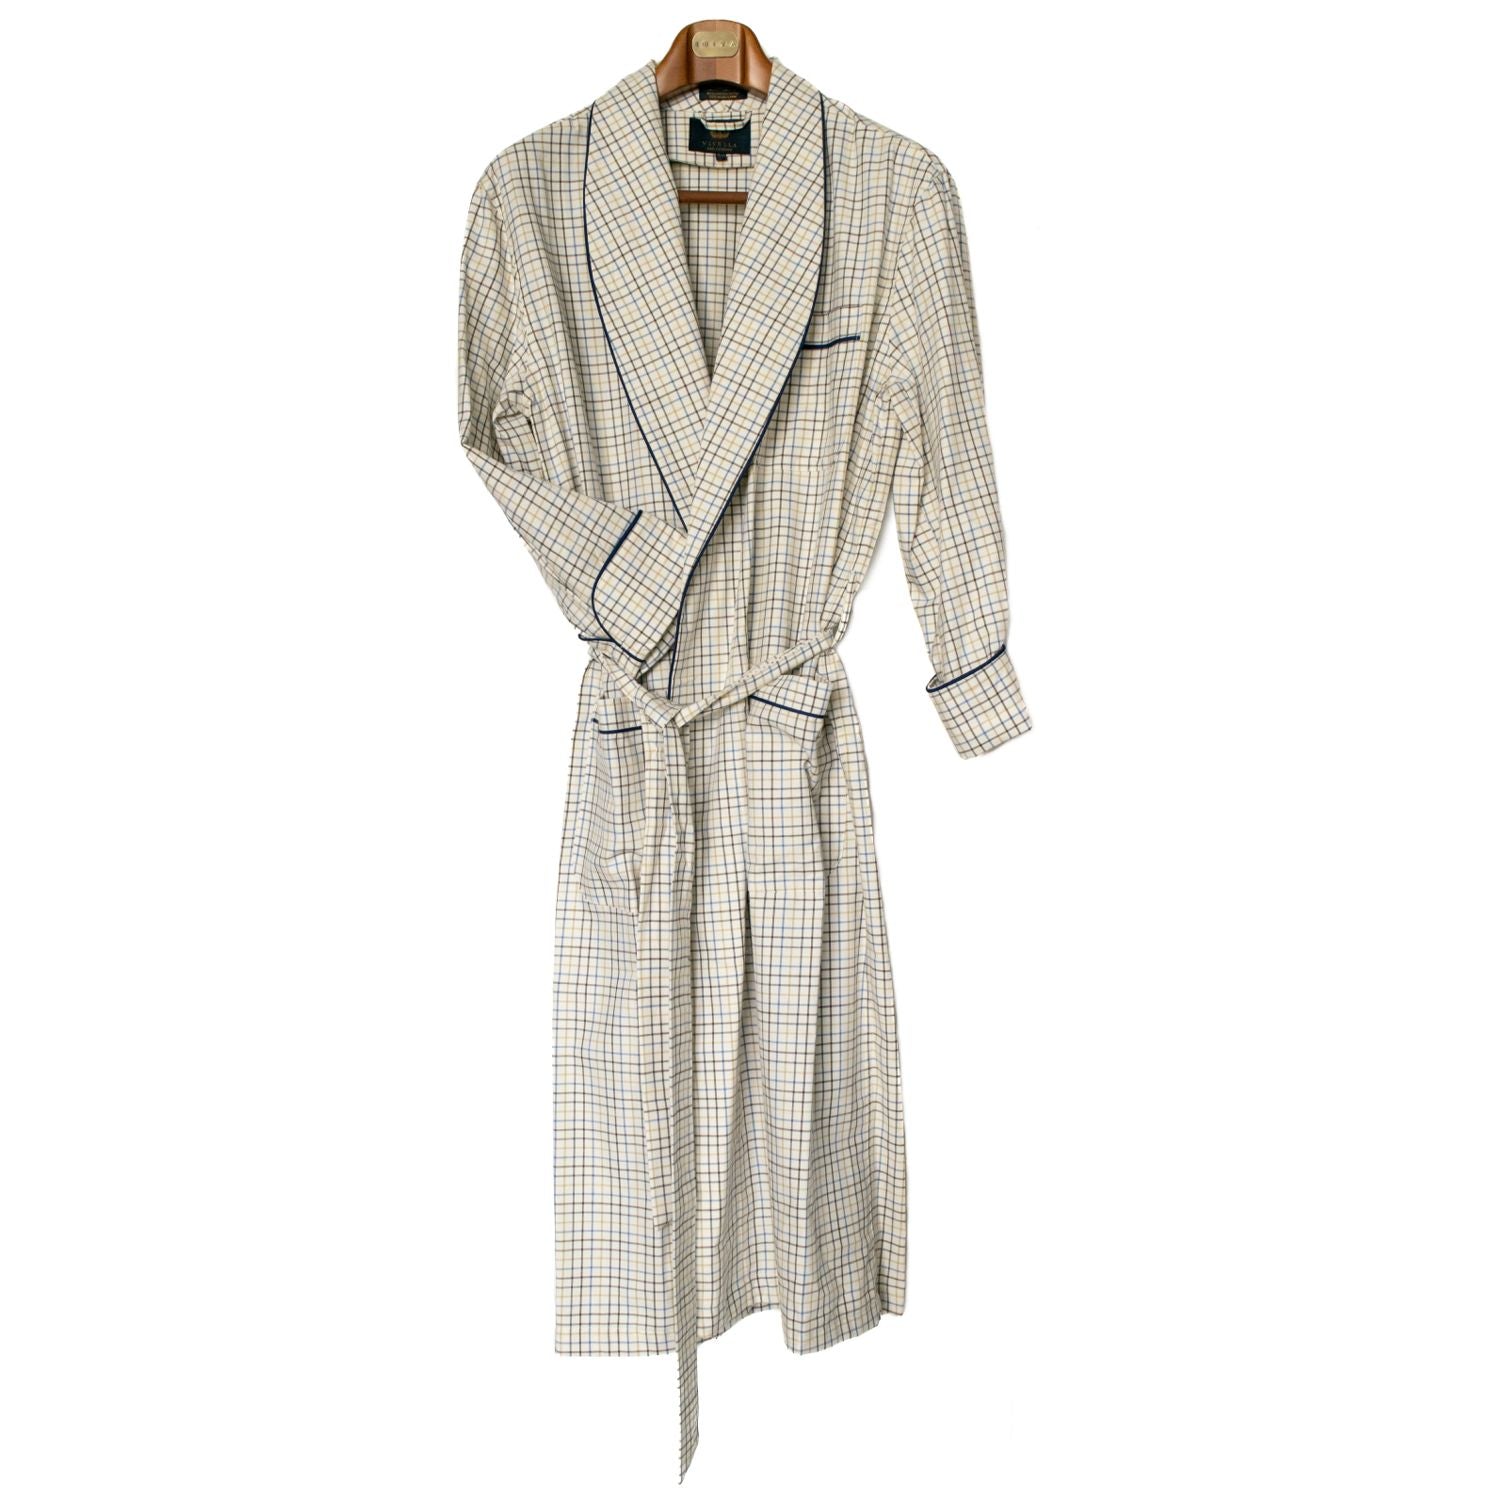 Gentleman's Cotton and Wool Blend Robe in Blue and Brown Tattersall (Size Medium) by Viyella